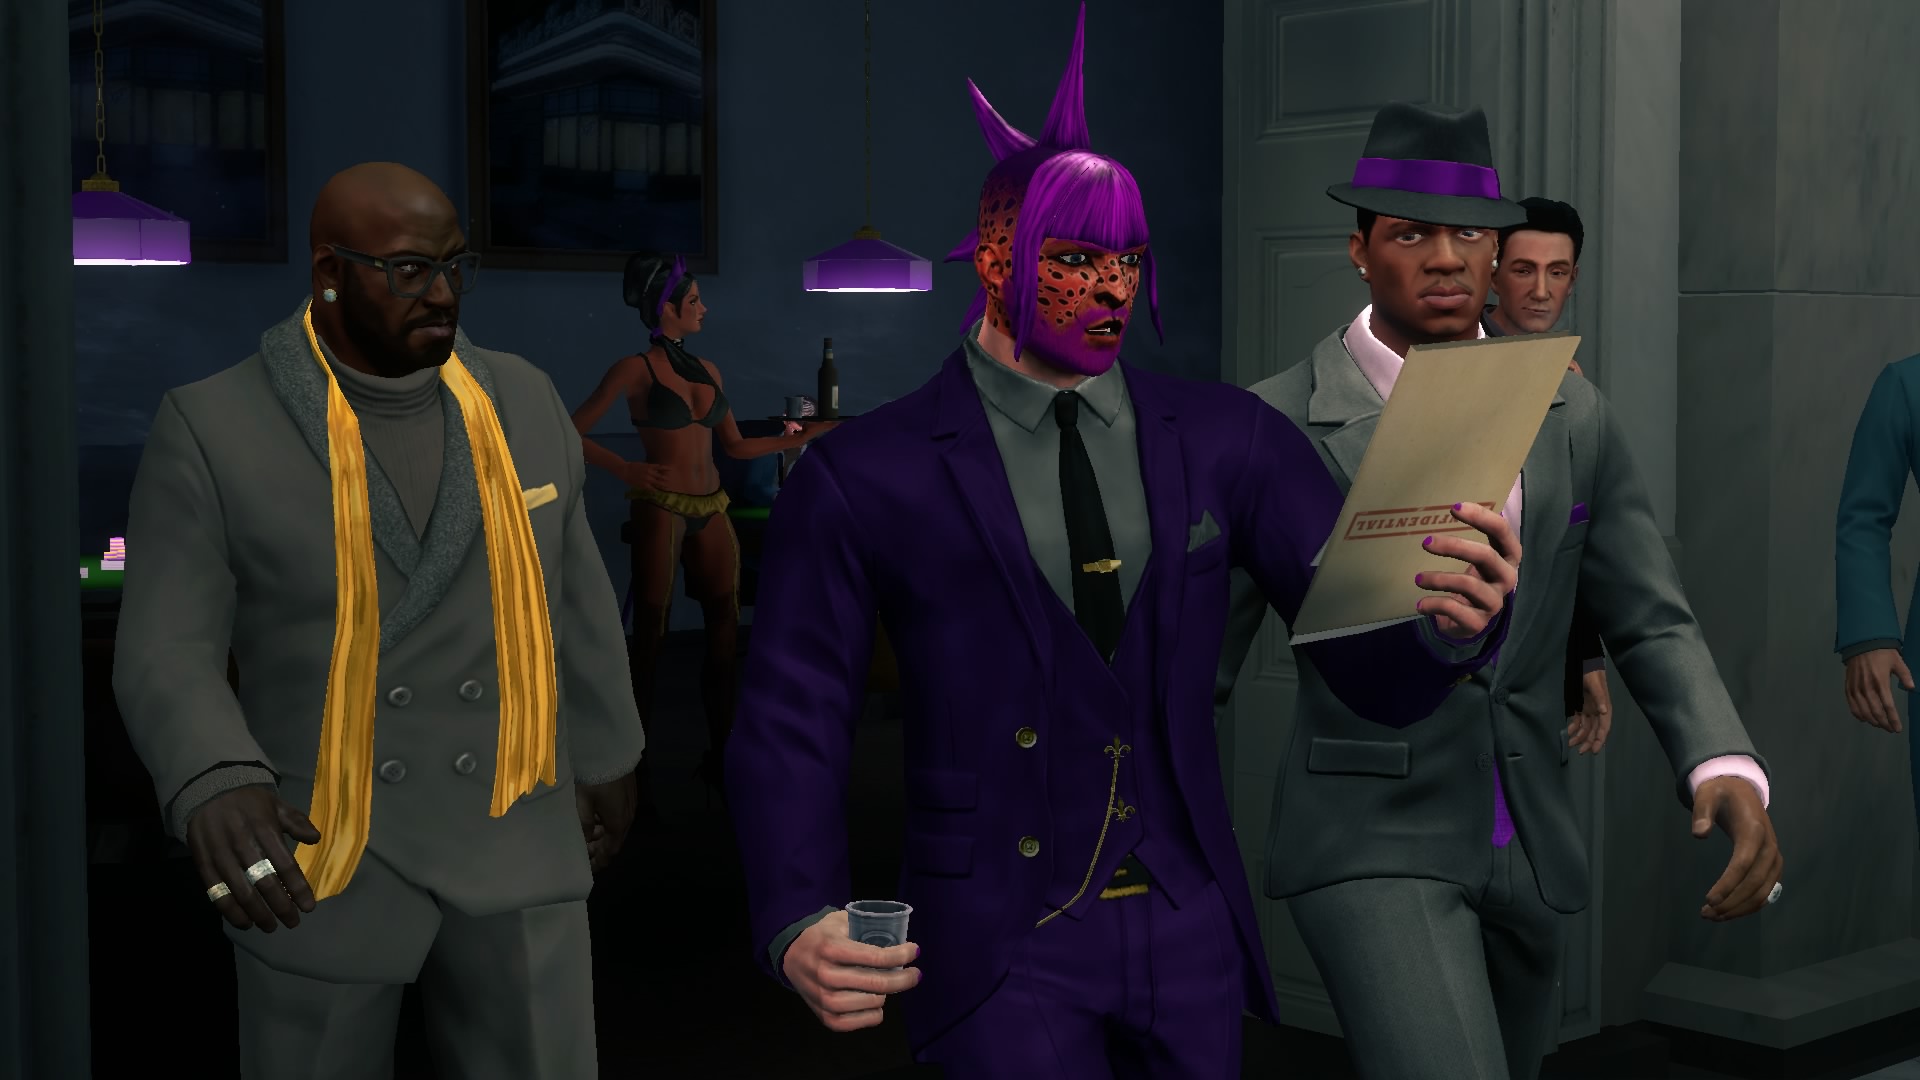 download free saints row re elected